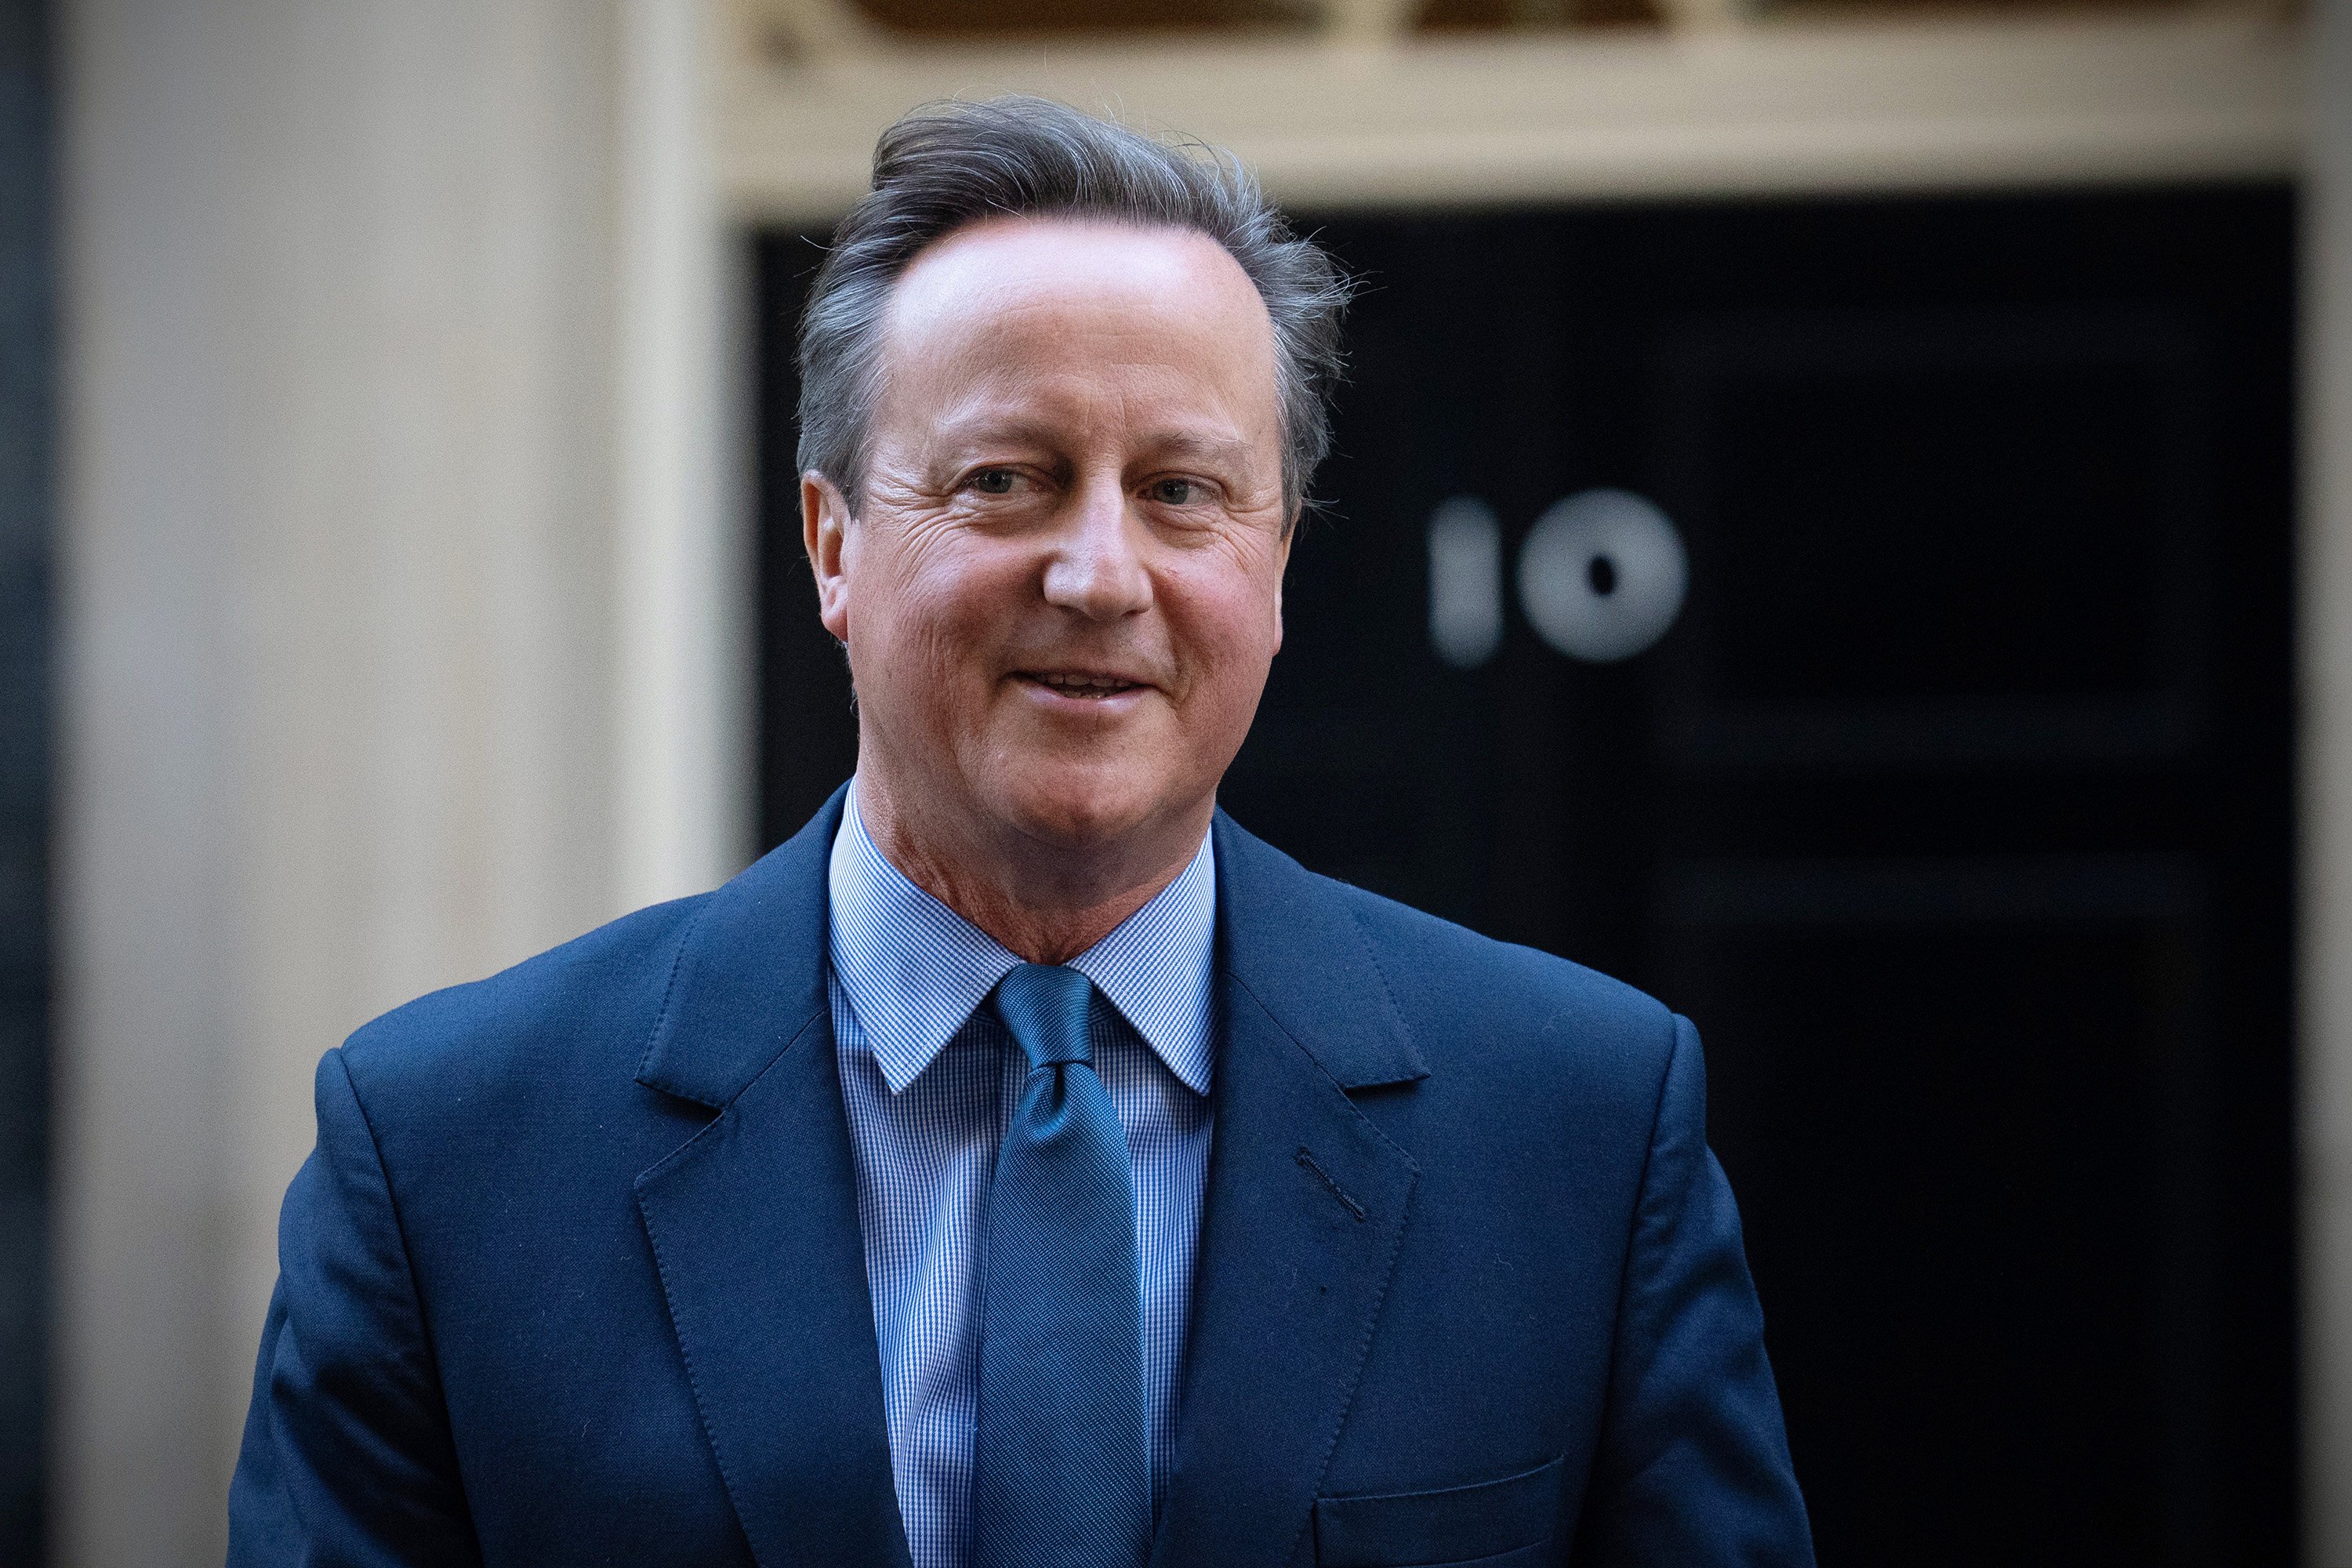 David Cameron, Britain’s former prime minister, leaves 10 Downing Street after being appointed foreign secretary on Monday. Photo: Getty Images / TNS